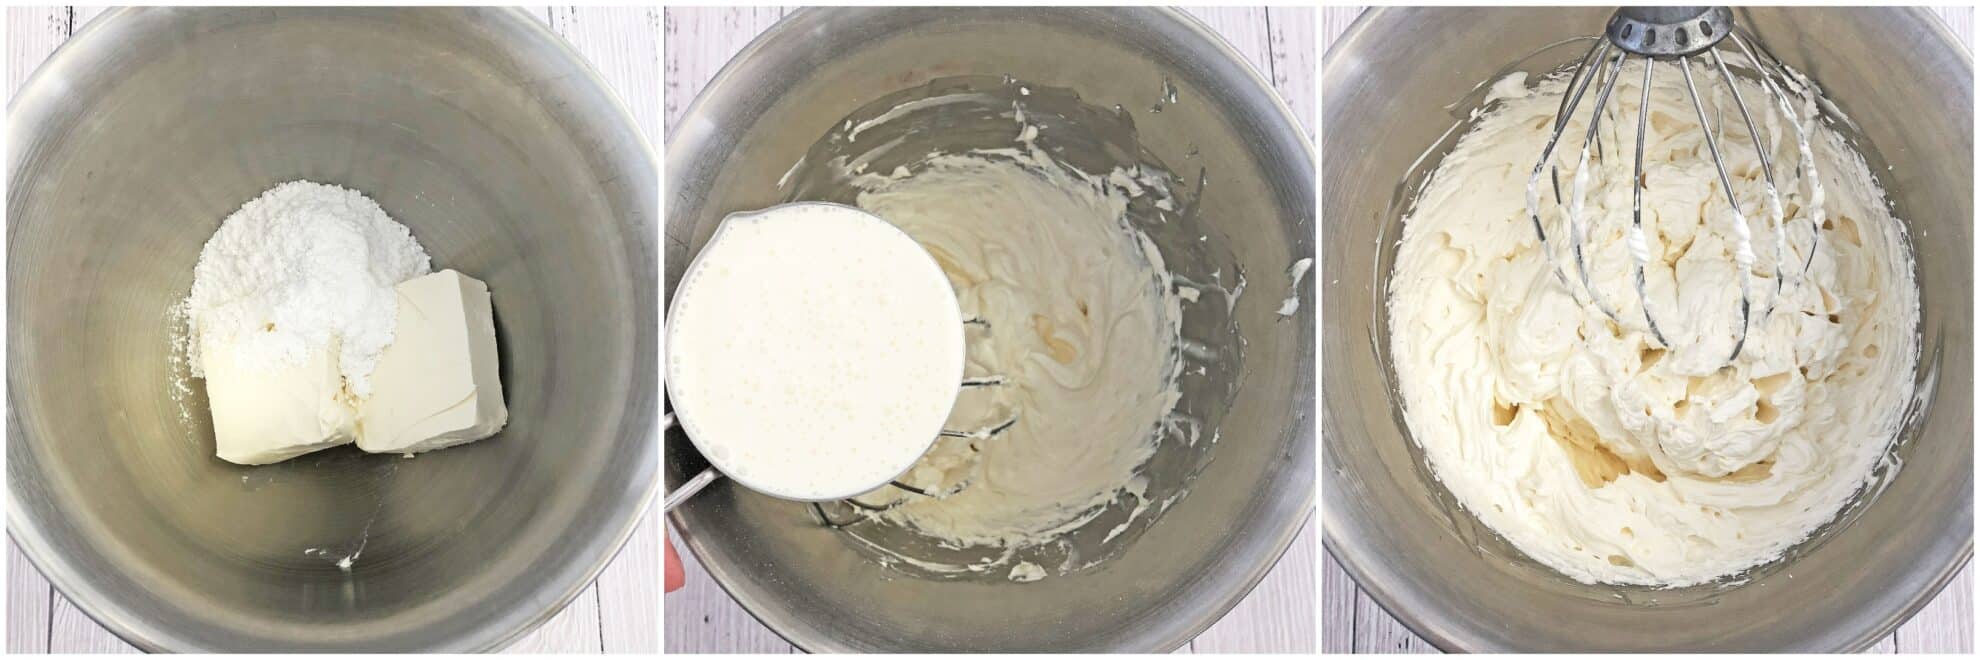 Whisk cream cheese and confectioners' sugar together in the large bowl.